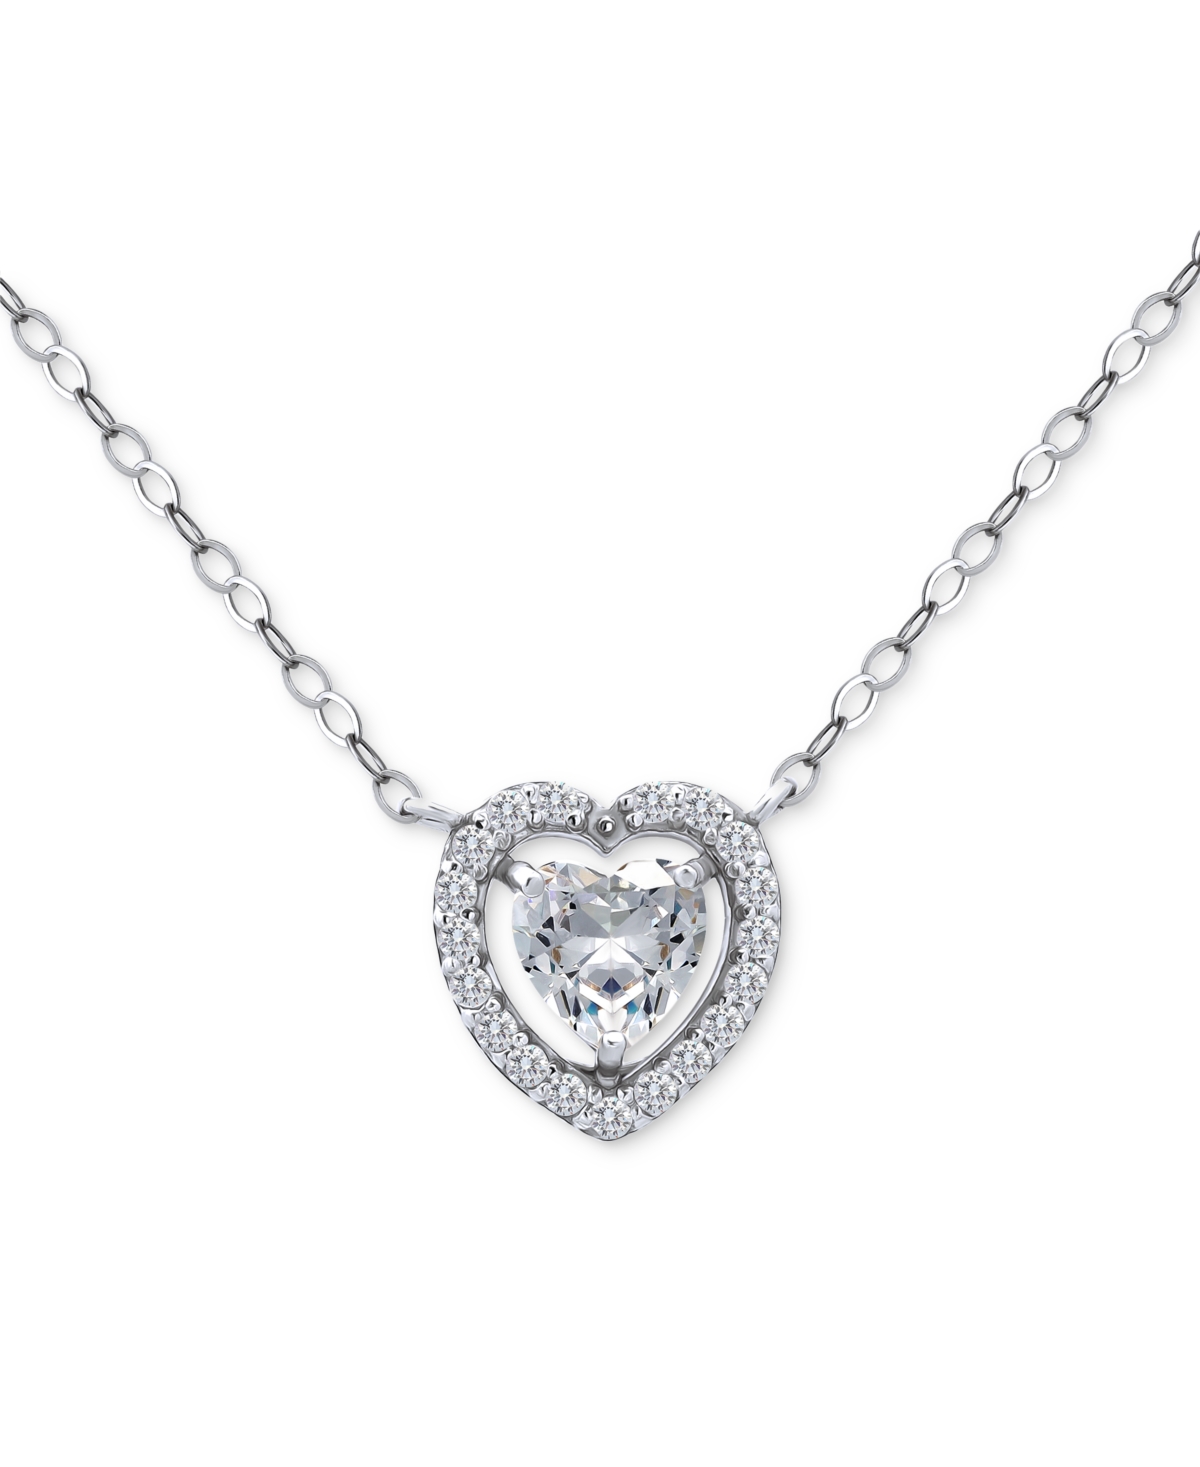 Giani Bernini Cubic Zirconia Heart Halo Pendant Necklace In Sterling Silver, 16" + 2" Extender, Created For Macy's In Gold Over Silver